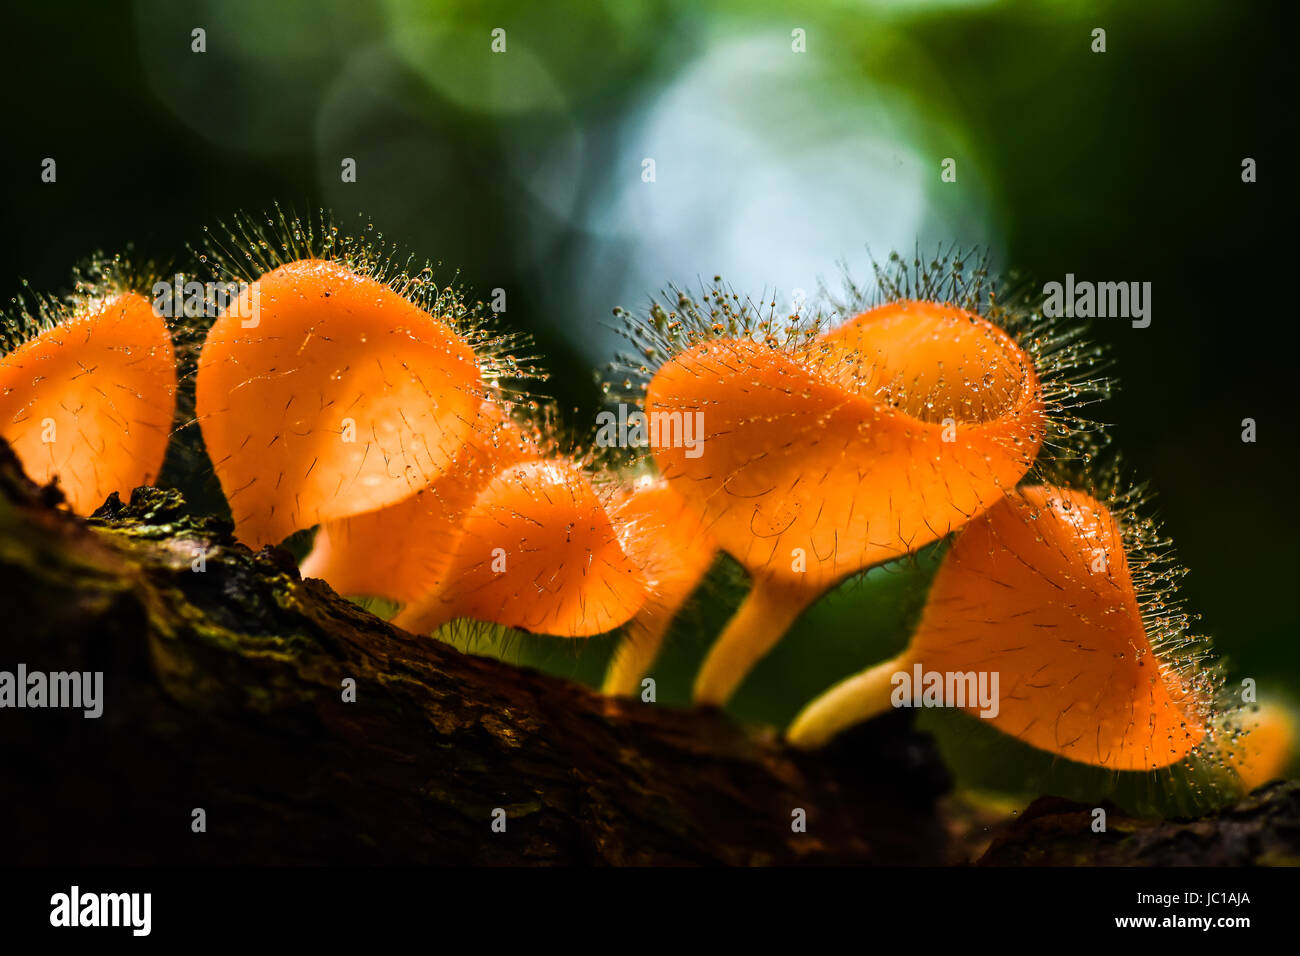 Hairy mushroom with water drops in national park of Thailand Stock Photo